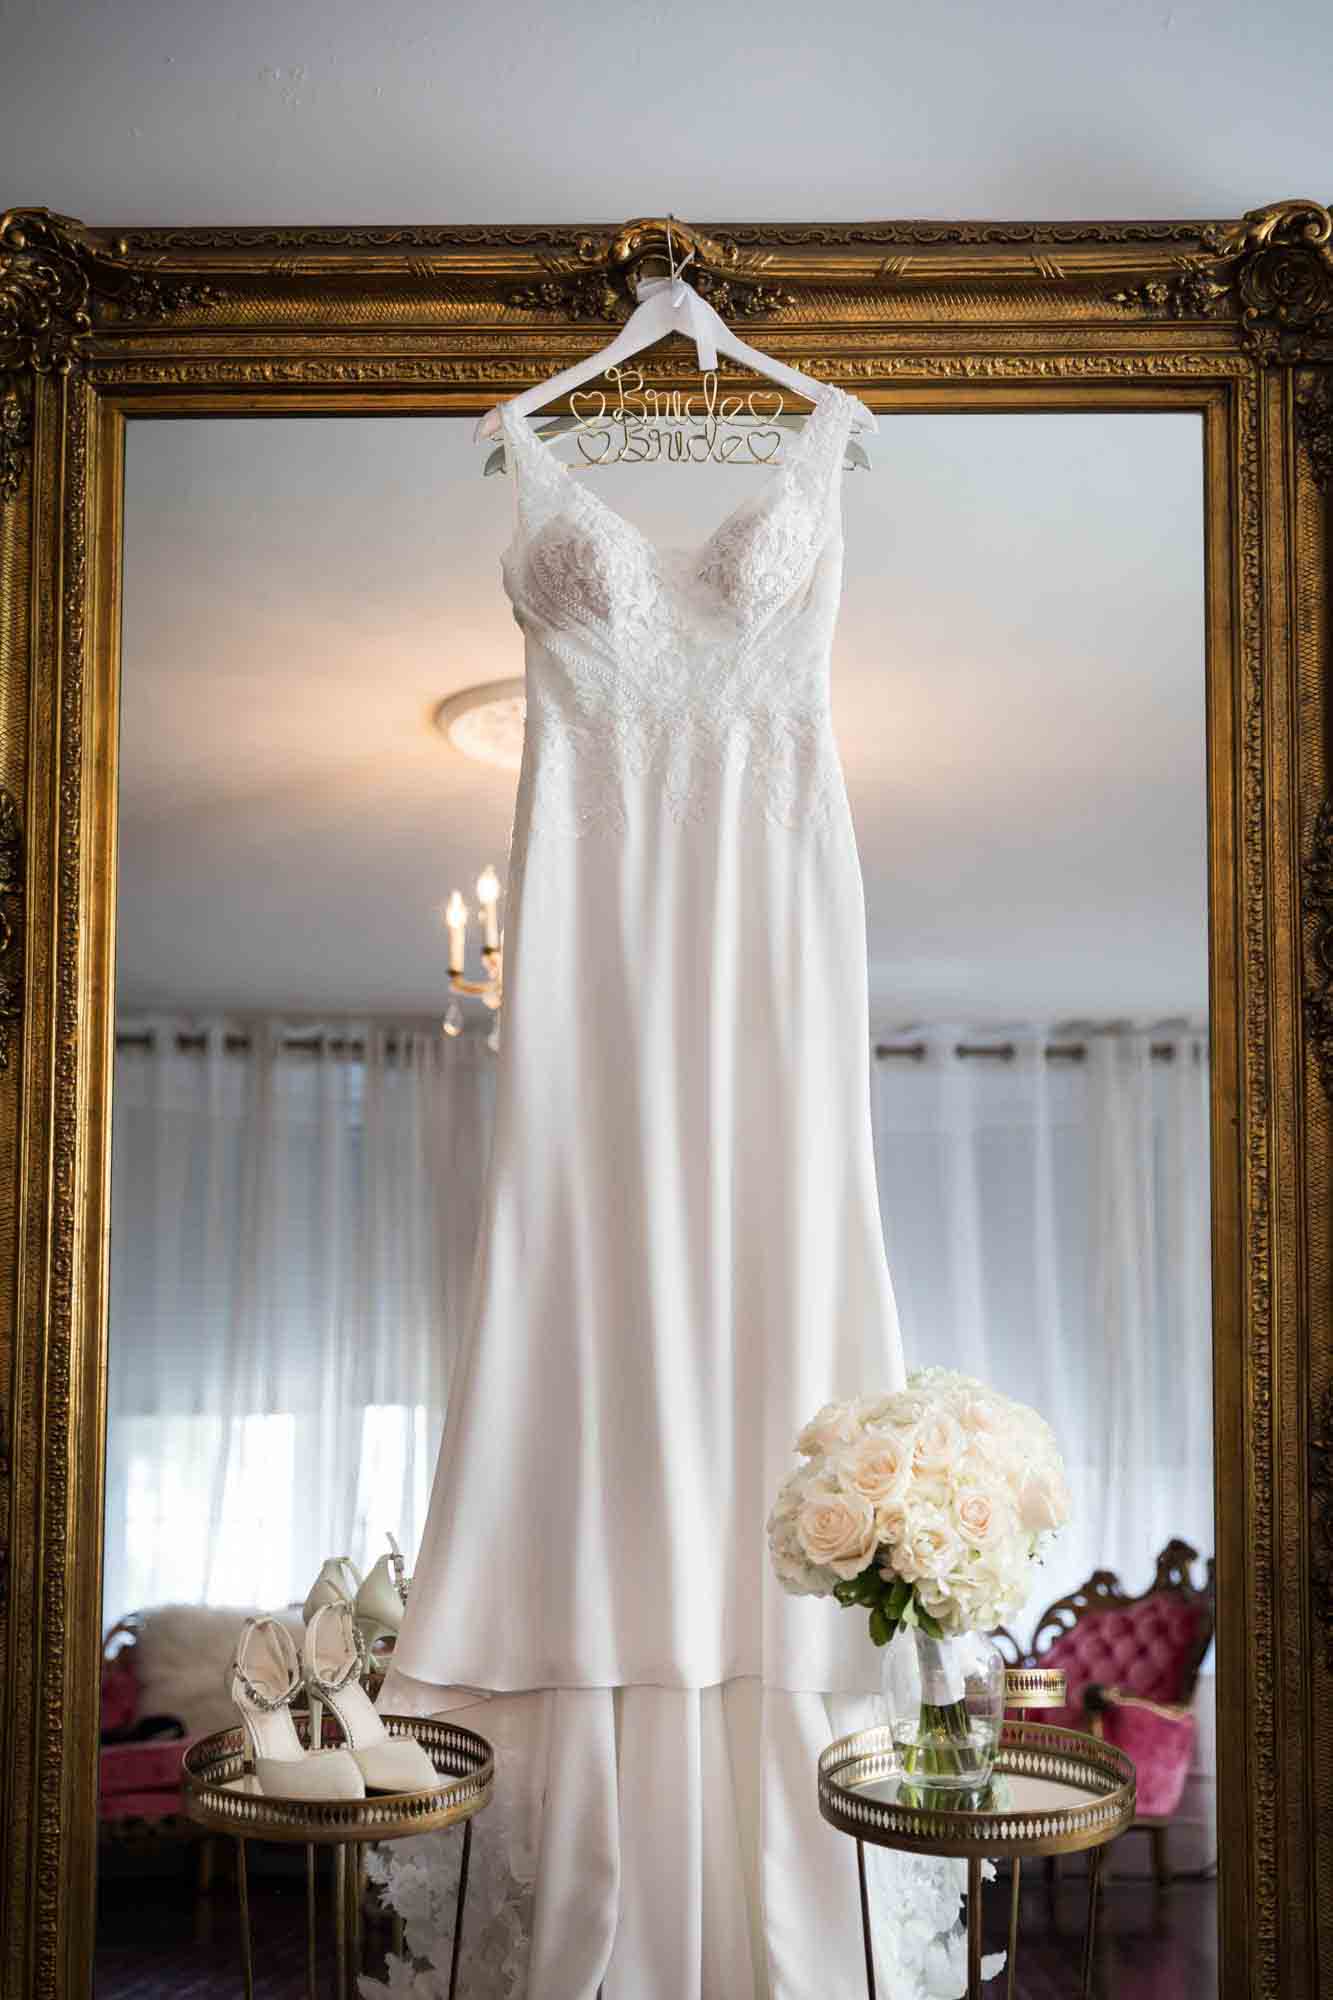 Wedding dress, white high heels, and white flower bouquet in front of vintage mirror in Briarcliff Manor bridal suite